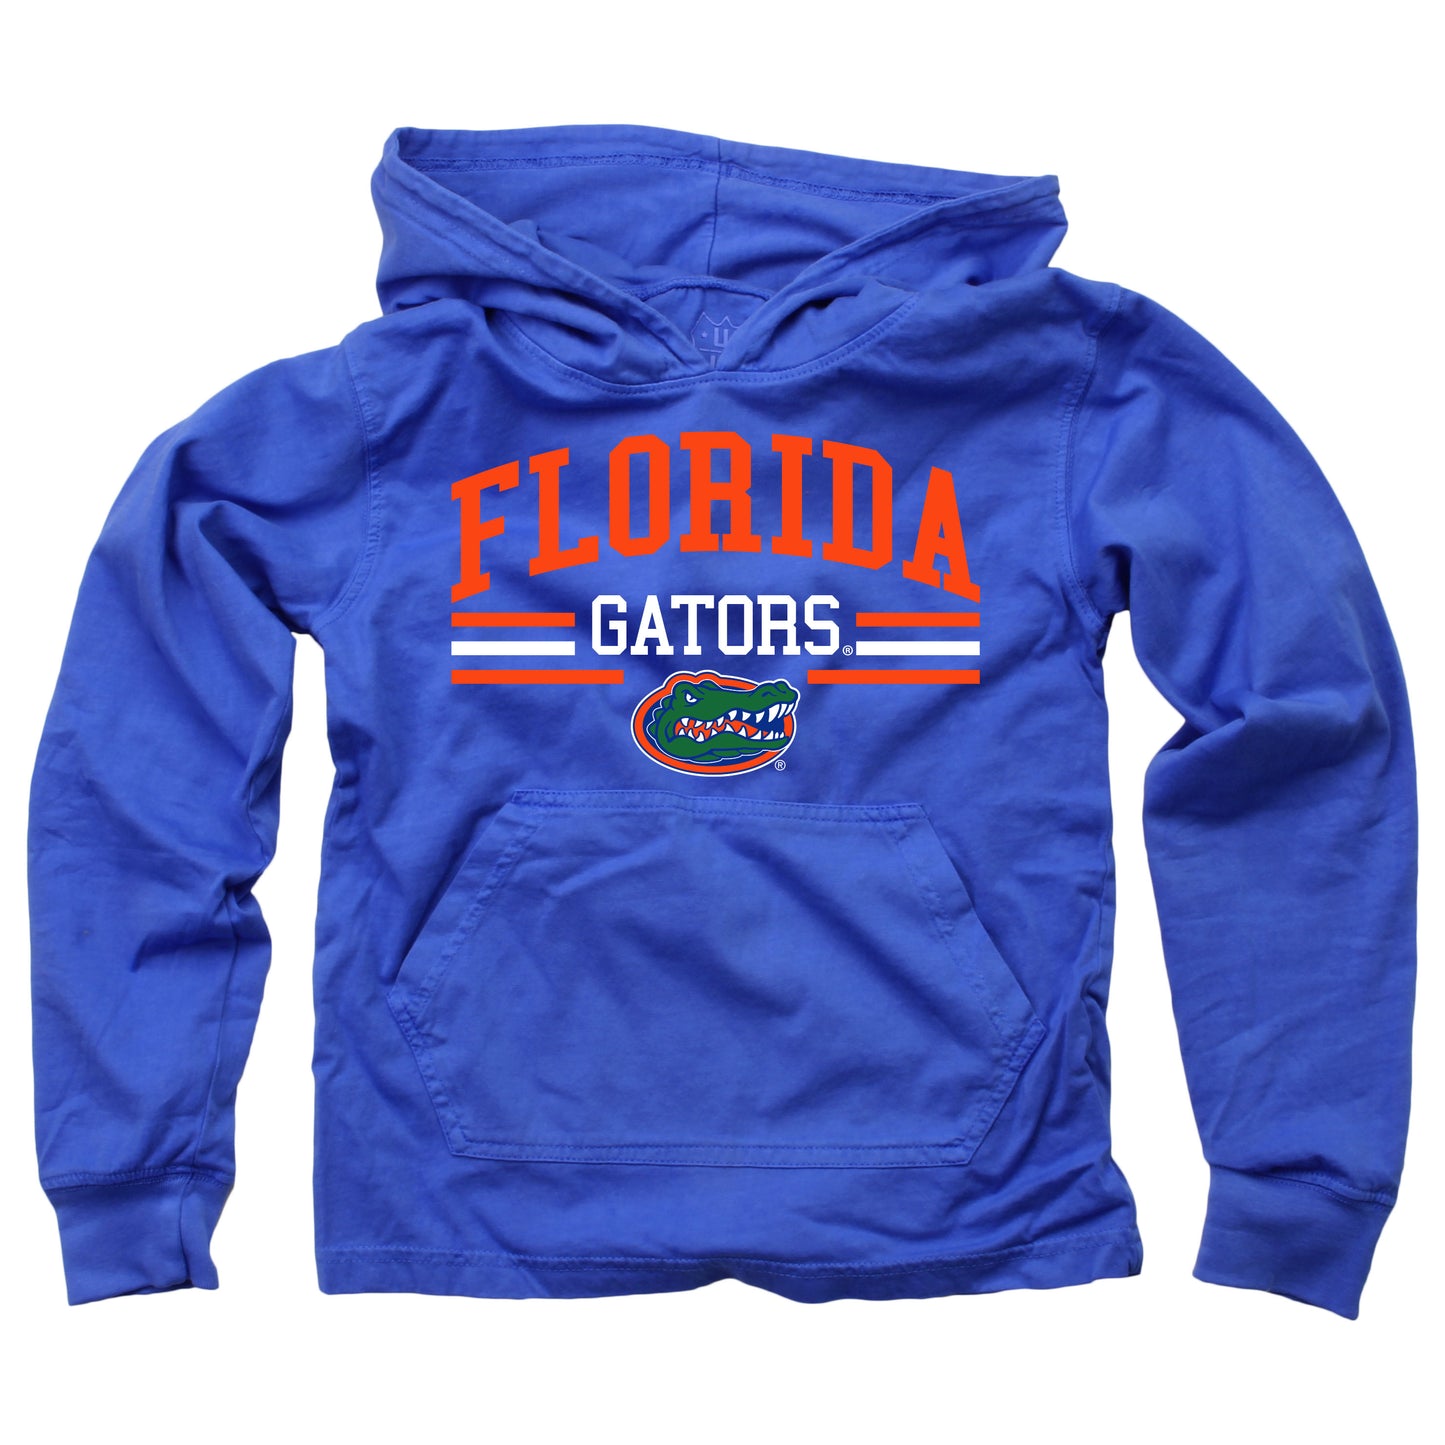 Florida Gators Wes and Willy Youth Boys Long Sleeve Hooded T-Shirt